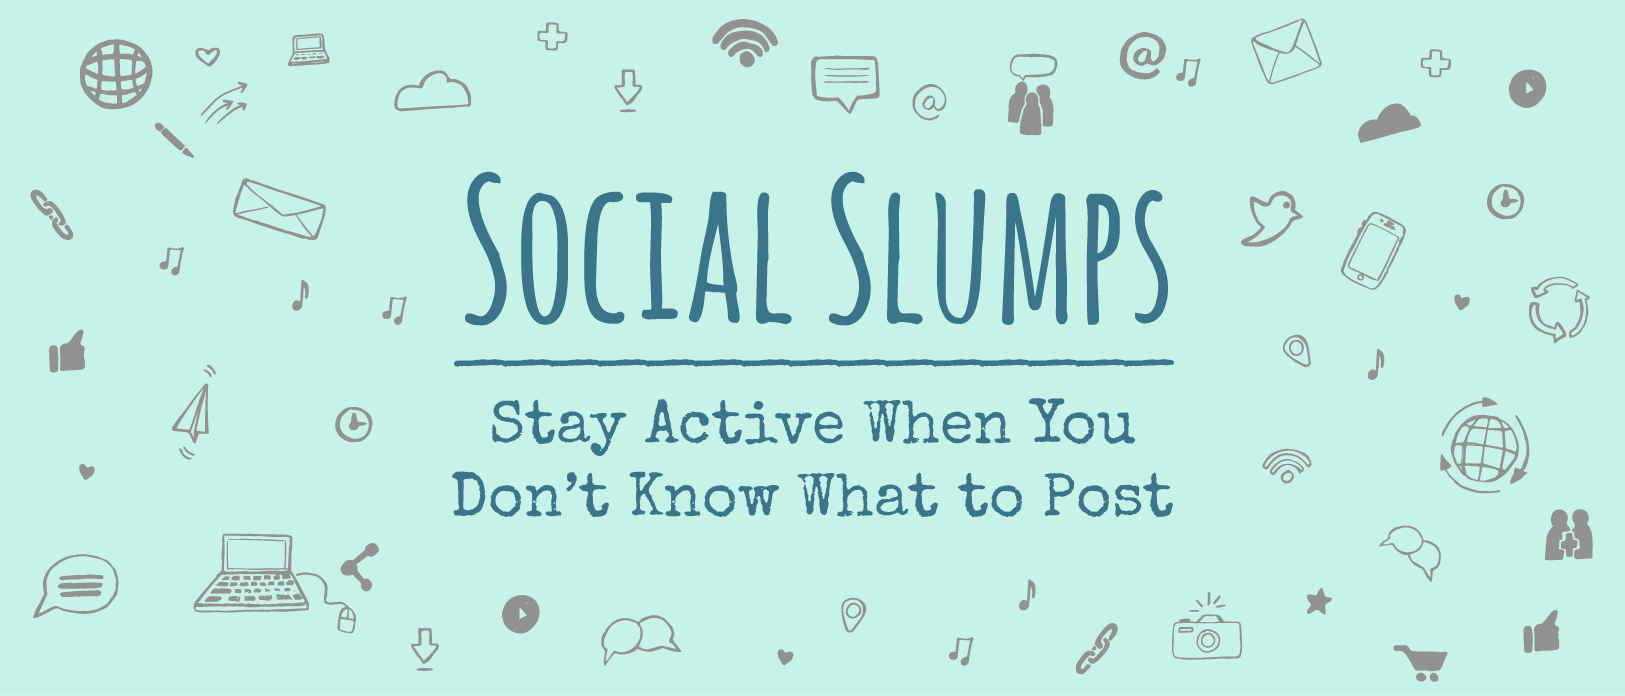 Social Slumps—Stay Active When You Don’t Know What to Post